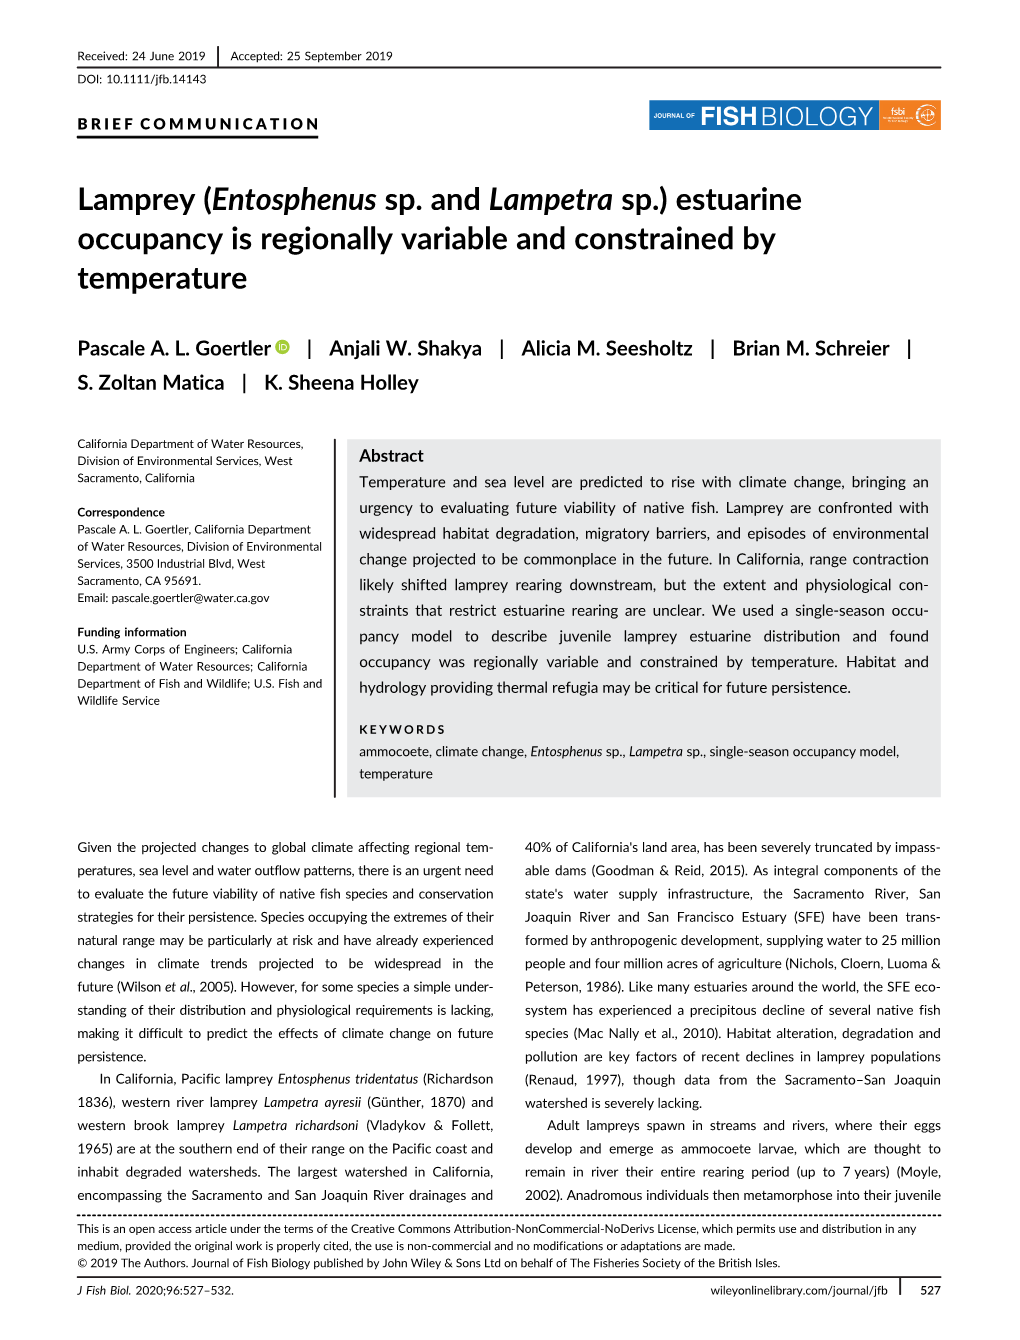 Lamprey (Entosphenus Sp. and Lampetra Sp.) Estuarine Occupancy€Is Regionally Variable and Constrained by Temperature